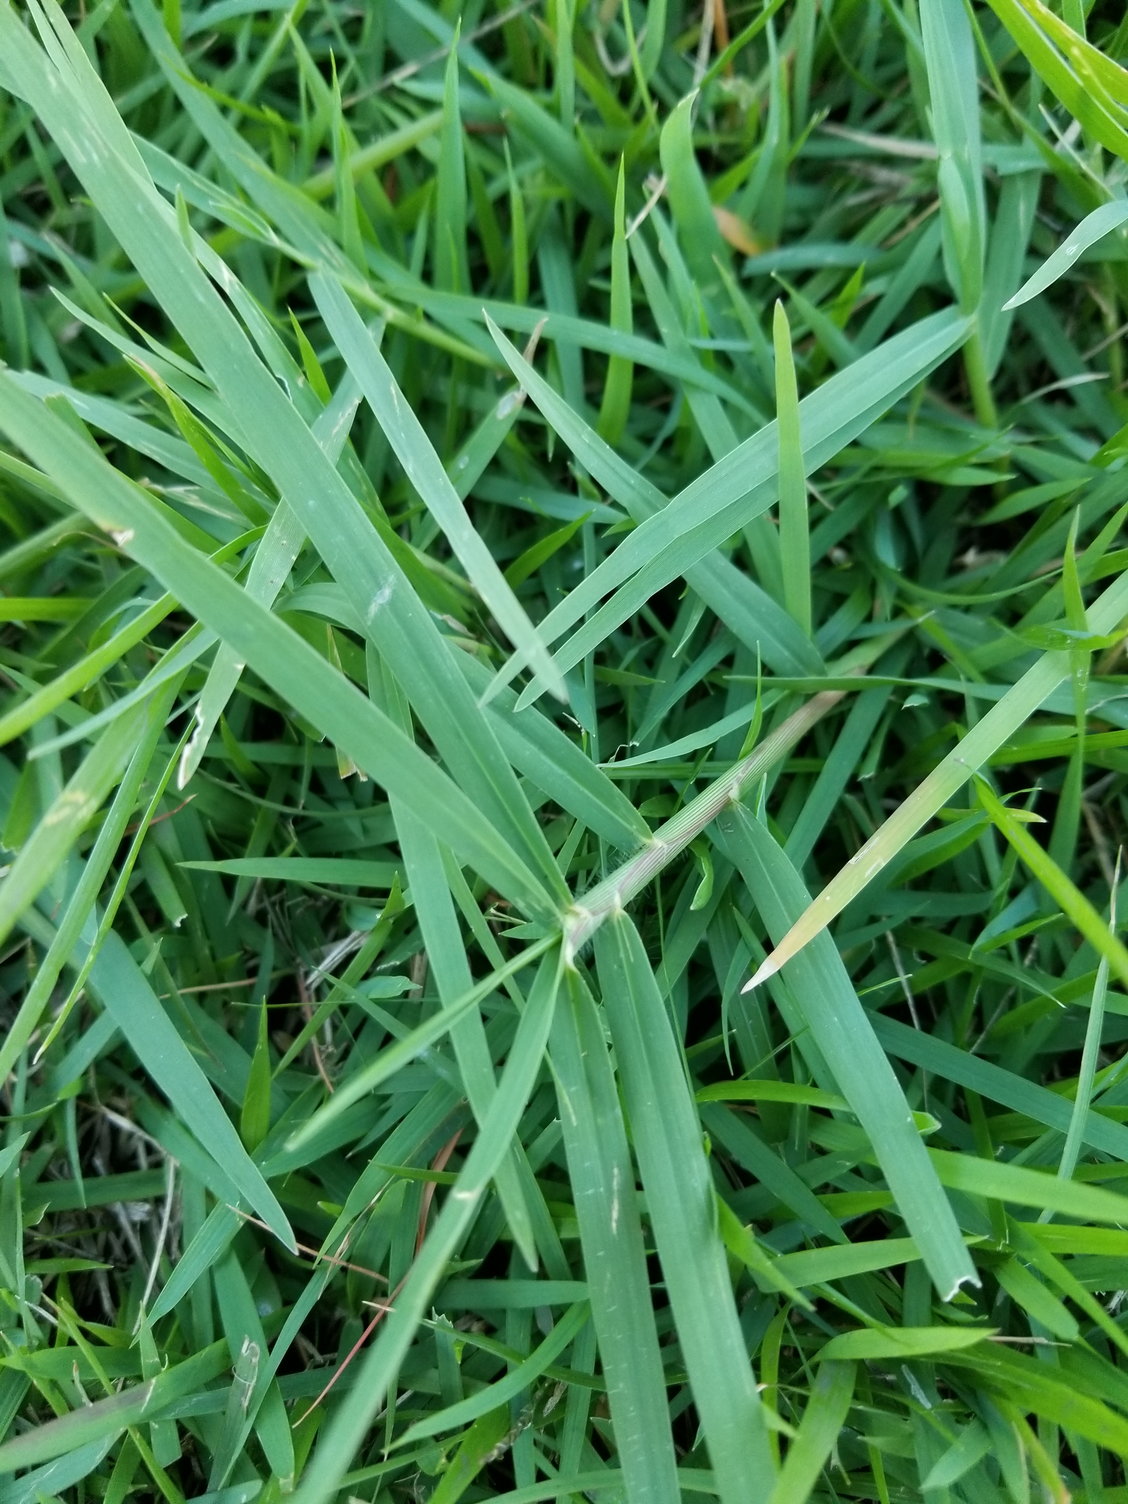 Types Of Lawn Grasses Identification